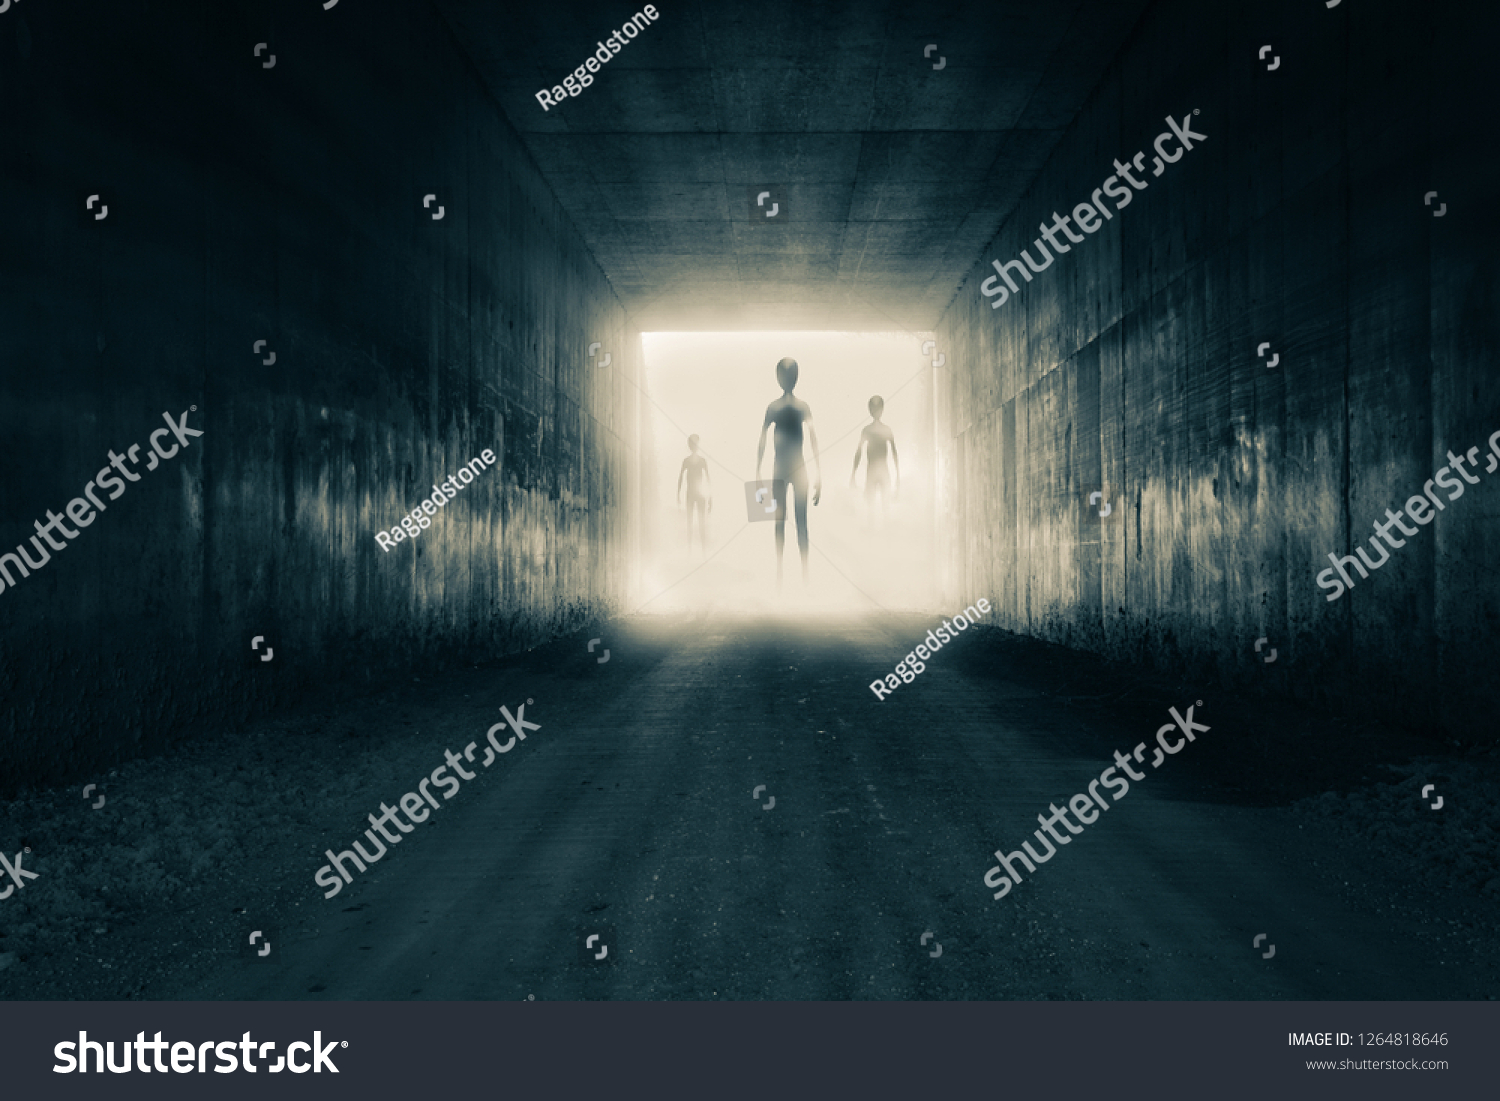 A group of aliens emerging from the light at the end of a dark sinister tunnel. With a high contrast edit. #1264818646